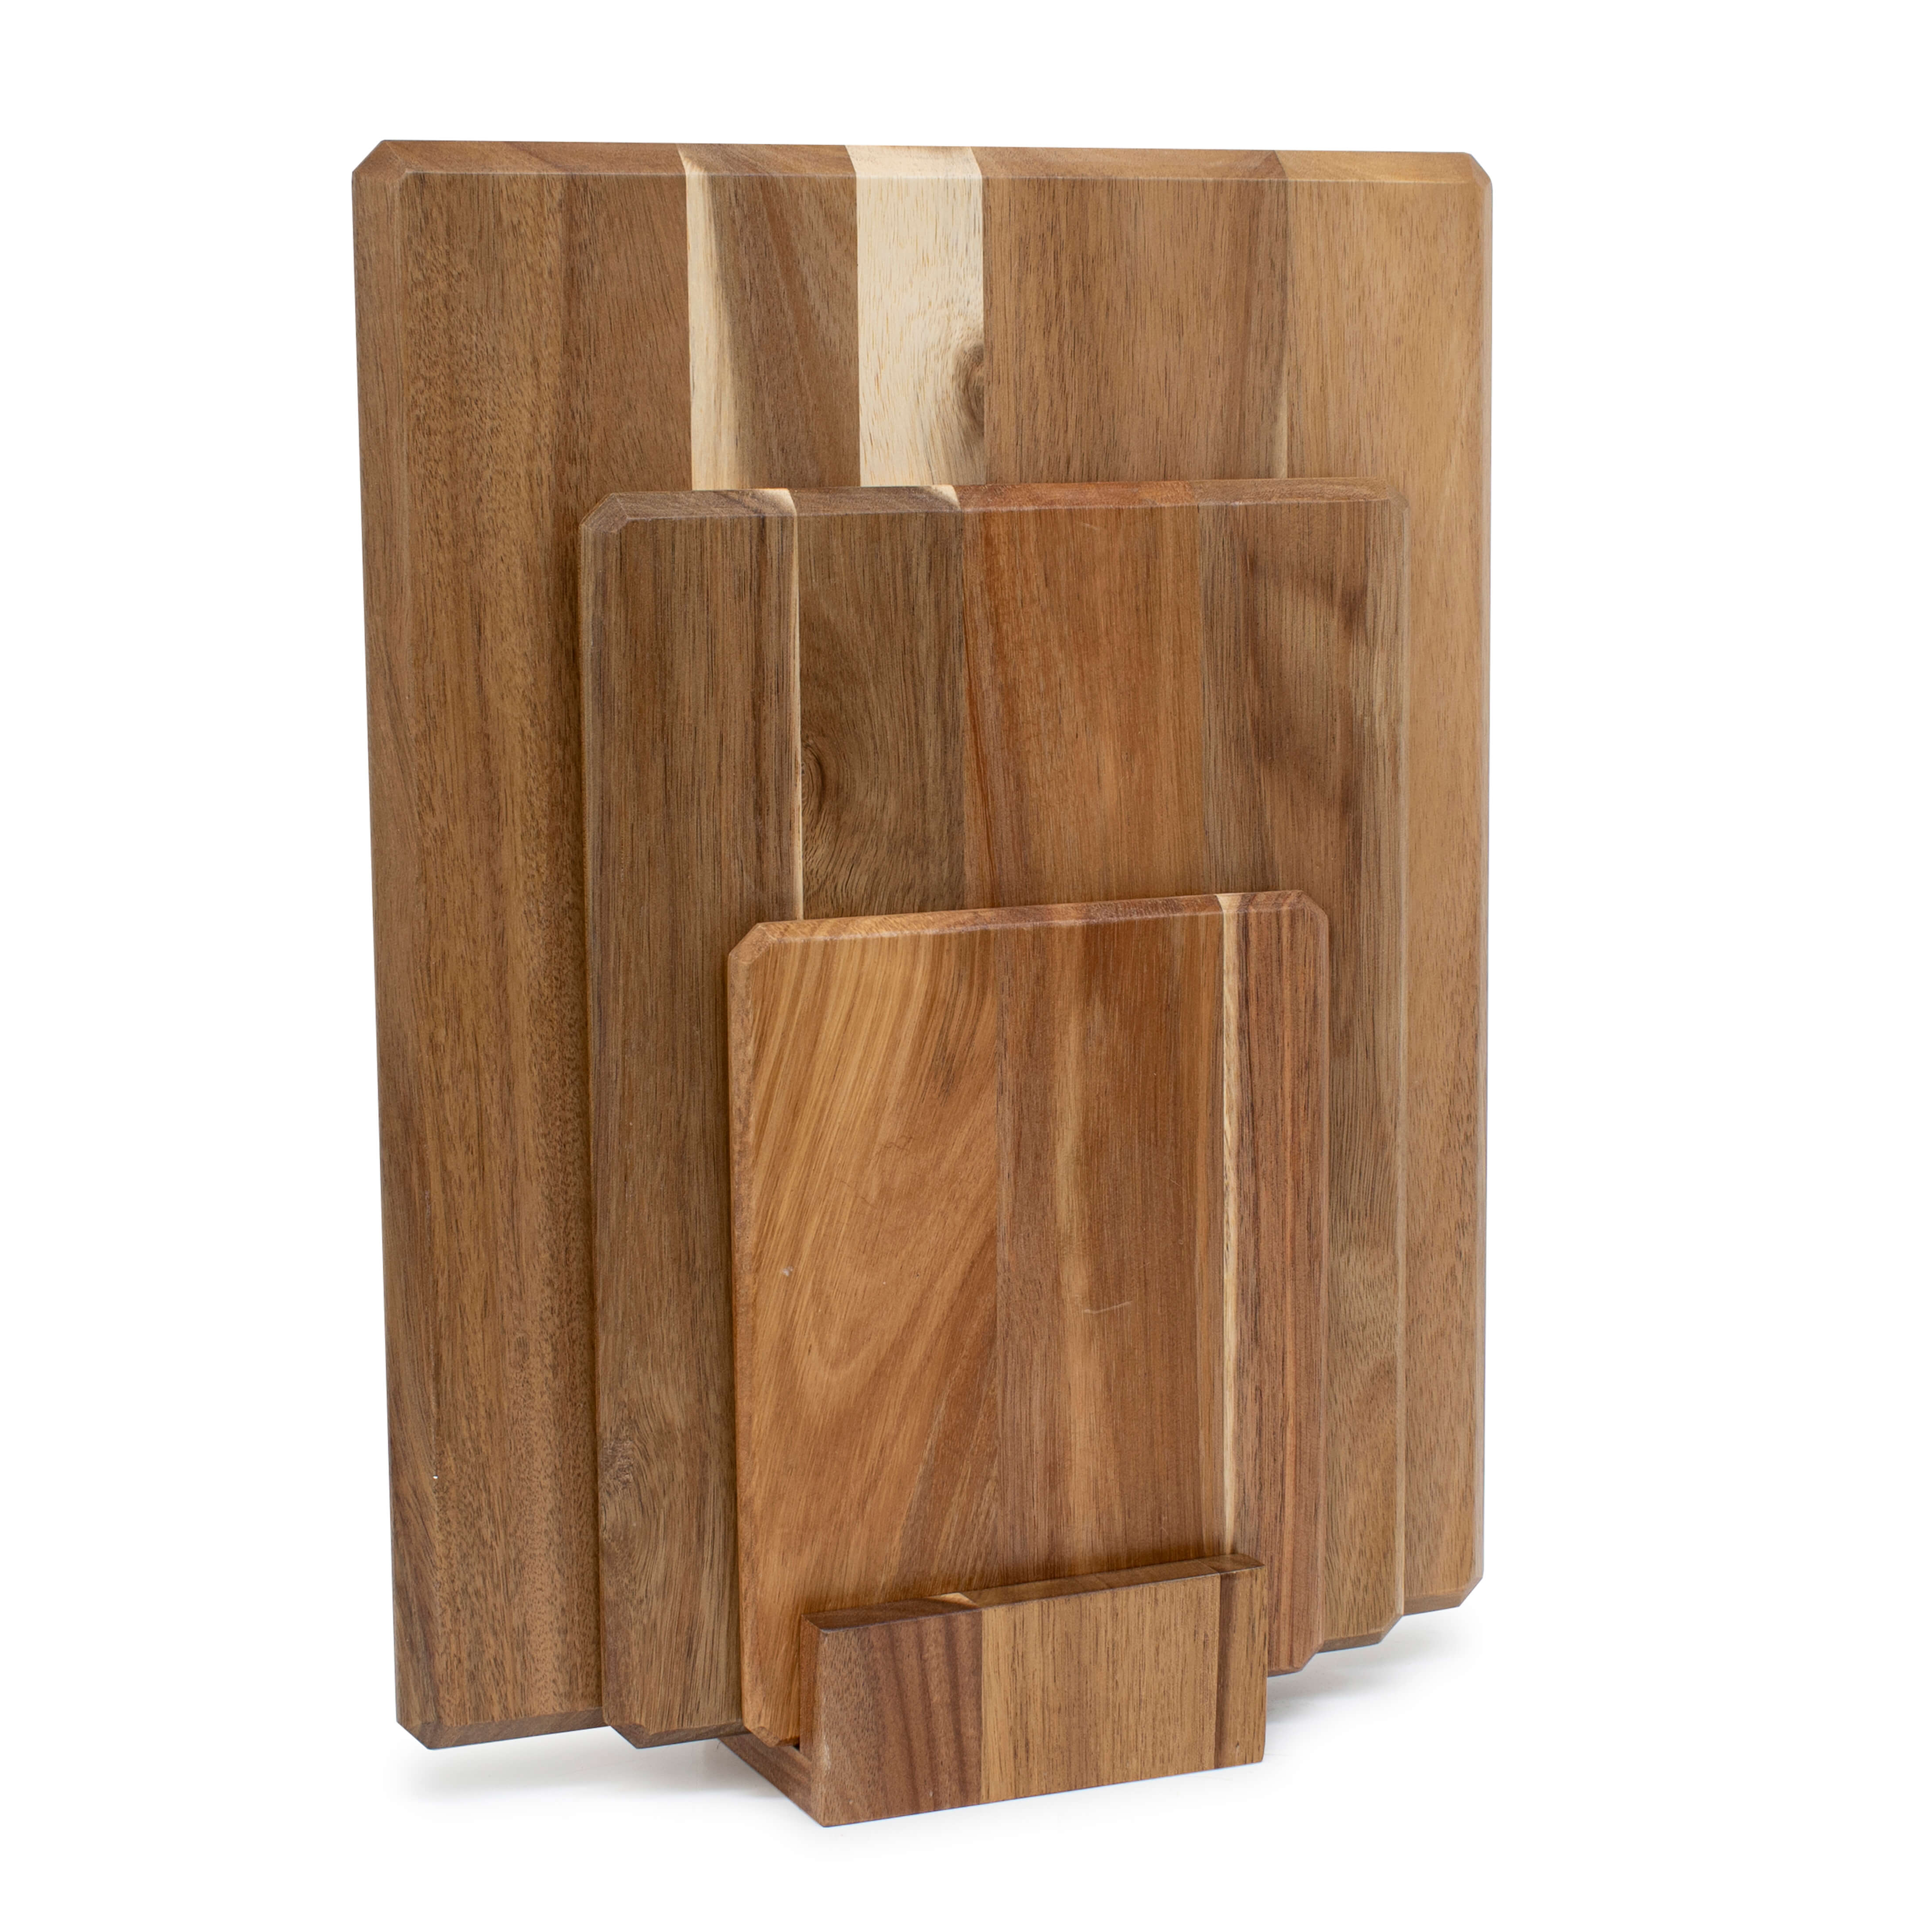 Wooden Chopping Board Set With Stand